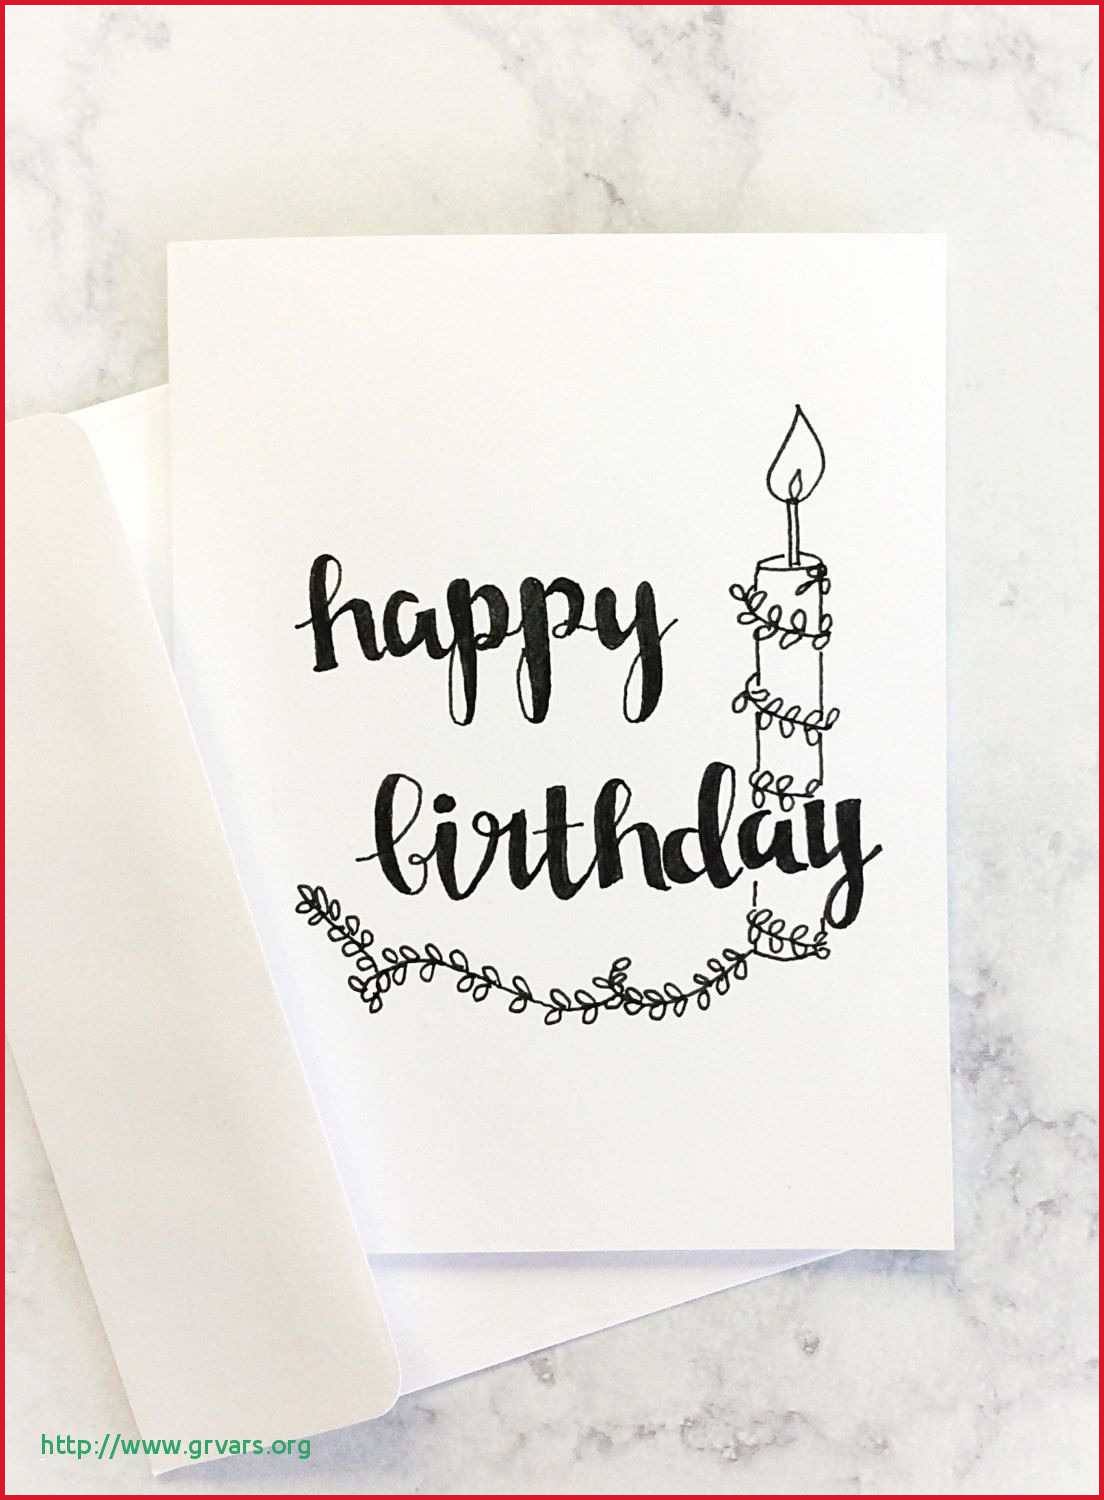 Ideas To Write In A Birthday Card Cute Birthday Card Ideas For Aunt Beautiful Messages An What To